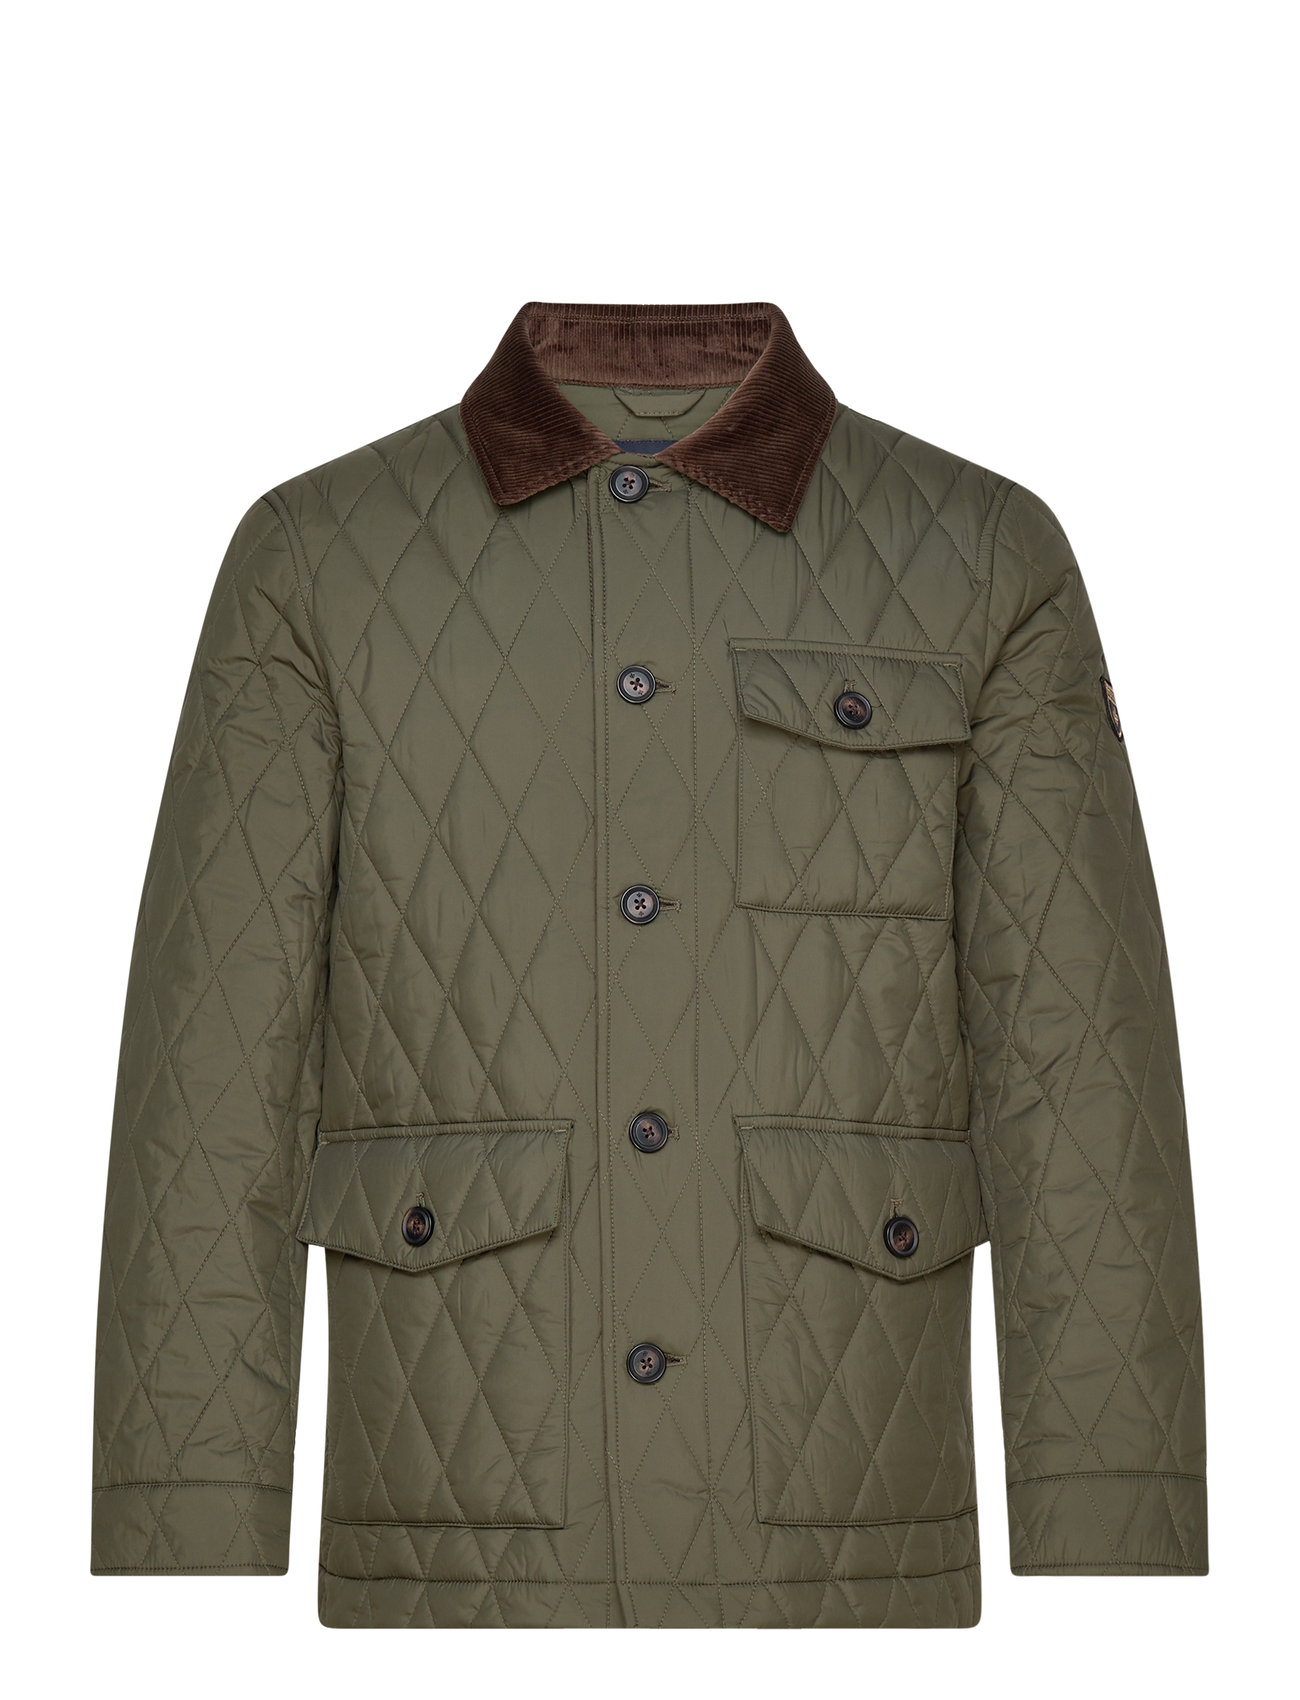 Thornhill Jacket Designers Jackets Quilted Jackets Khaki Green Morris